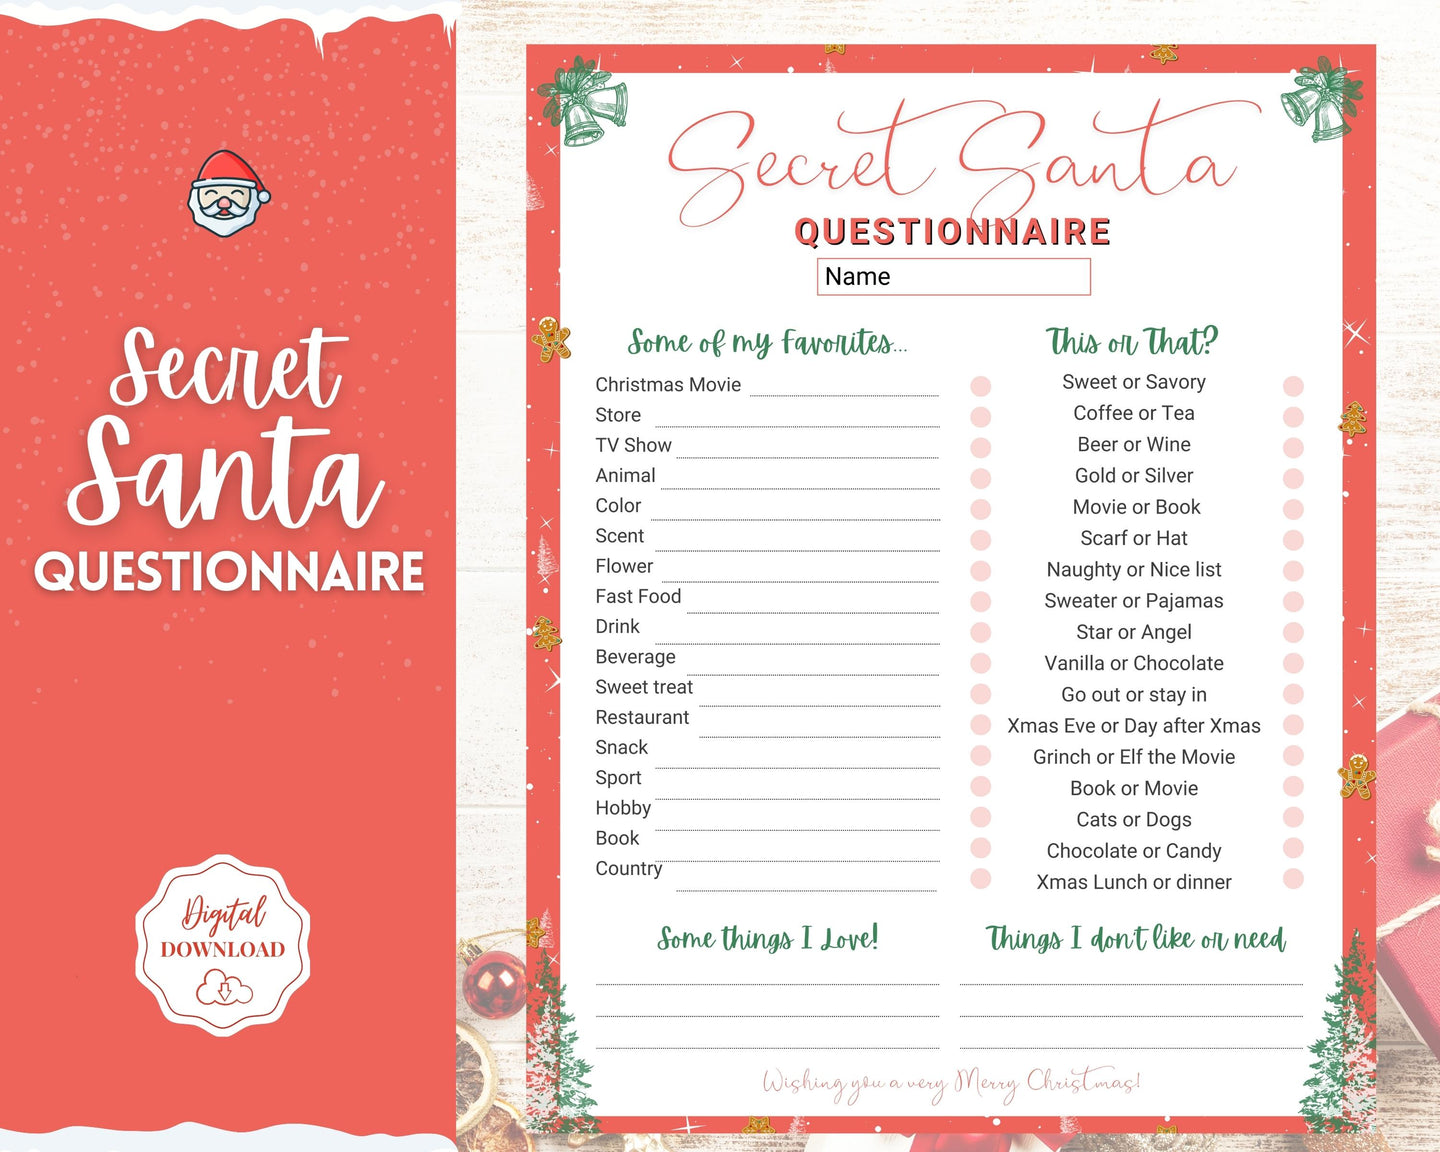 Secret Santa Questionnaire Printable | Holiday Gift Exchange for Work, Family and Friends | Red Style 2